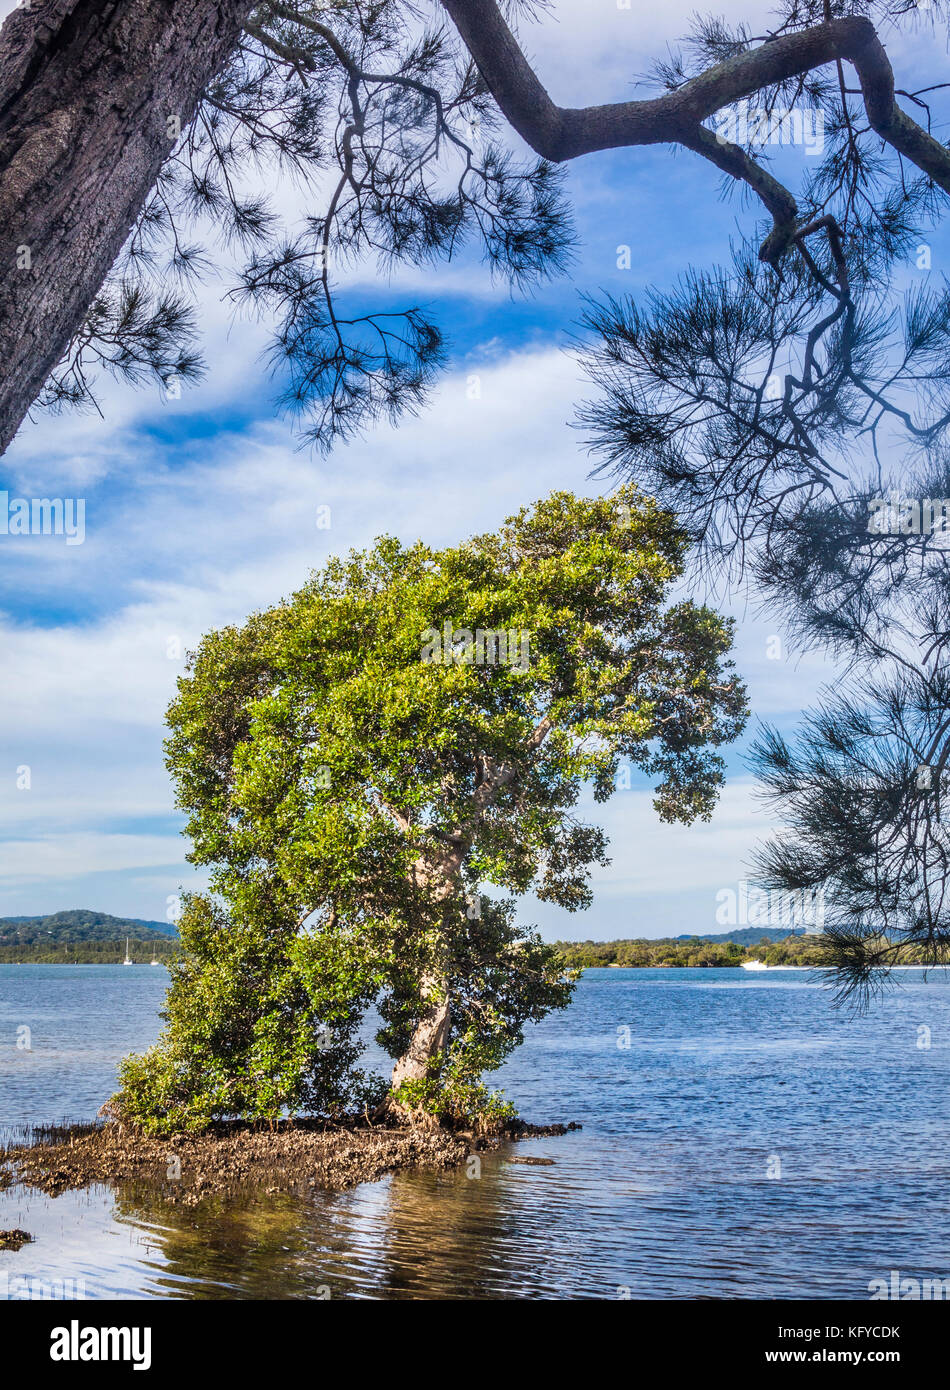 Australia, New South Wales, Central Coast, Woy Woy, huge mangrove tree at the shores of Brisbane Water Stock Photo